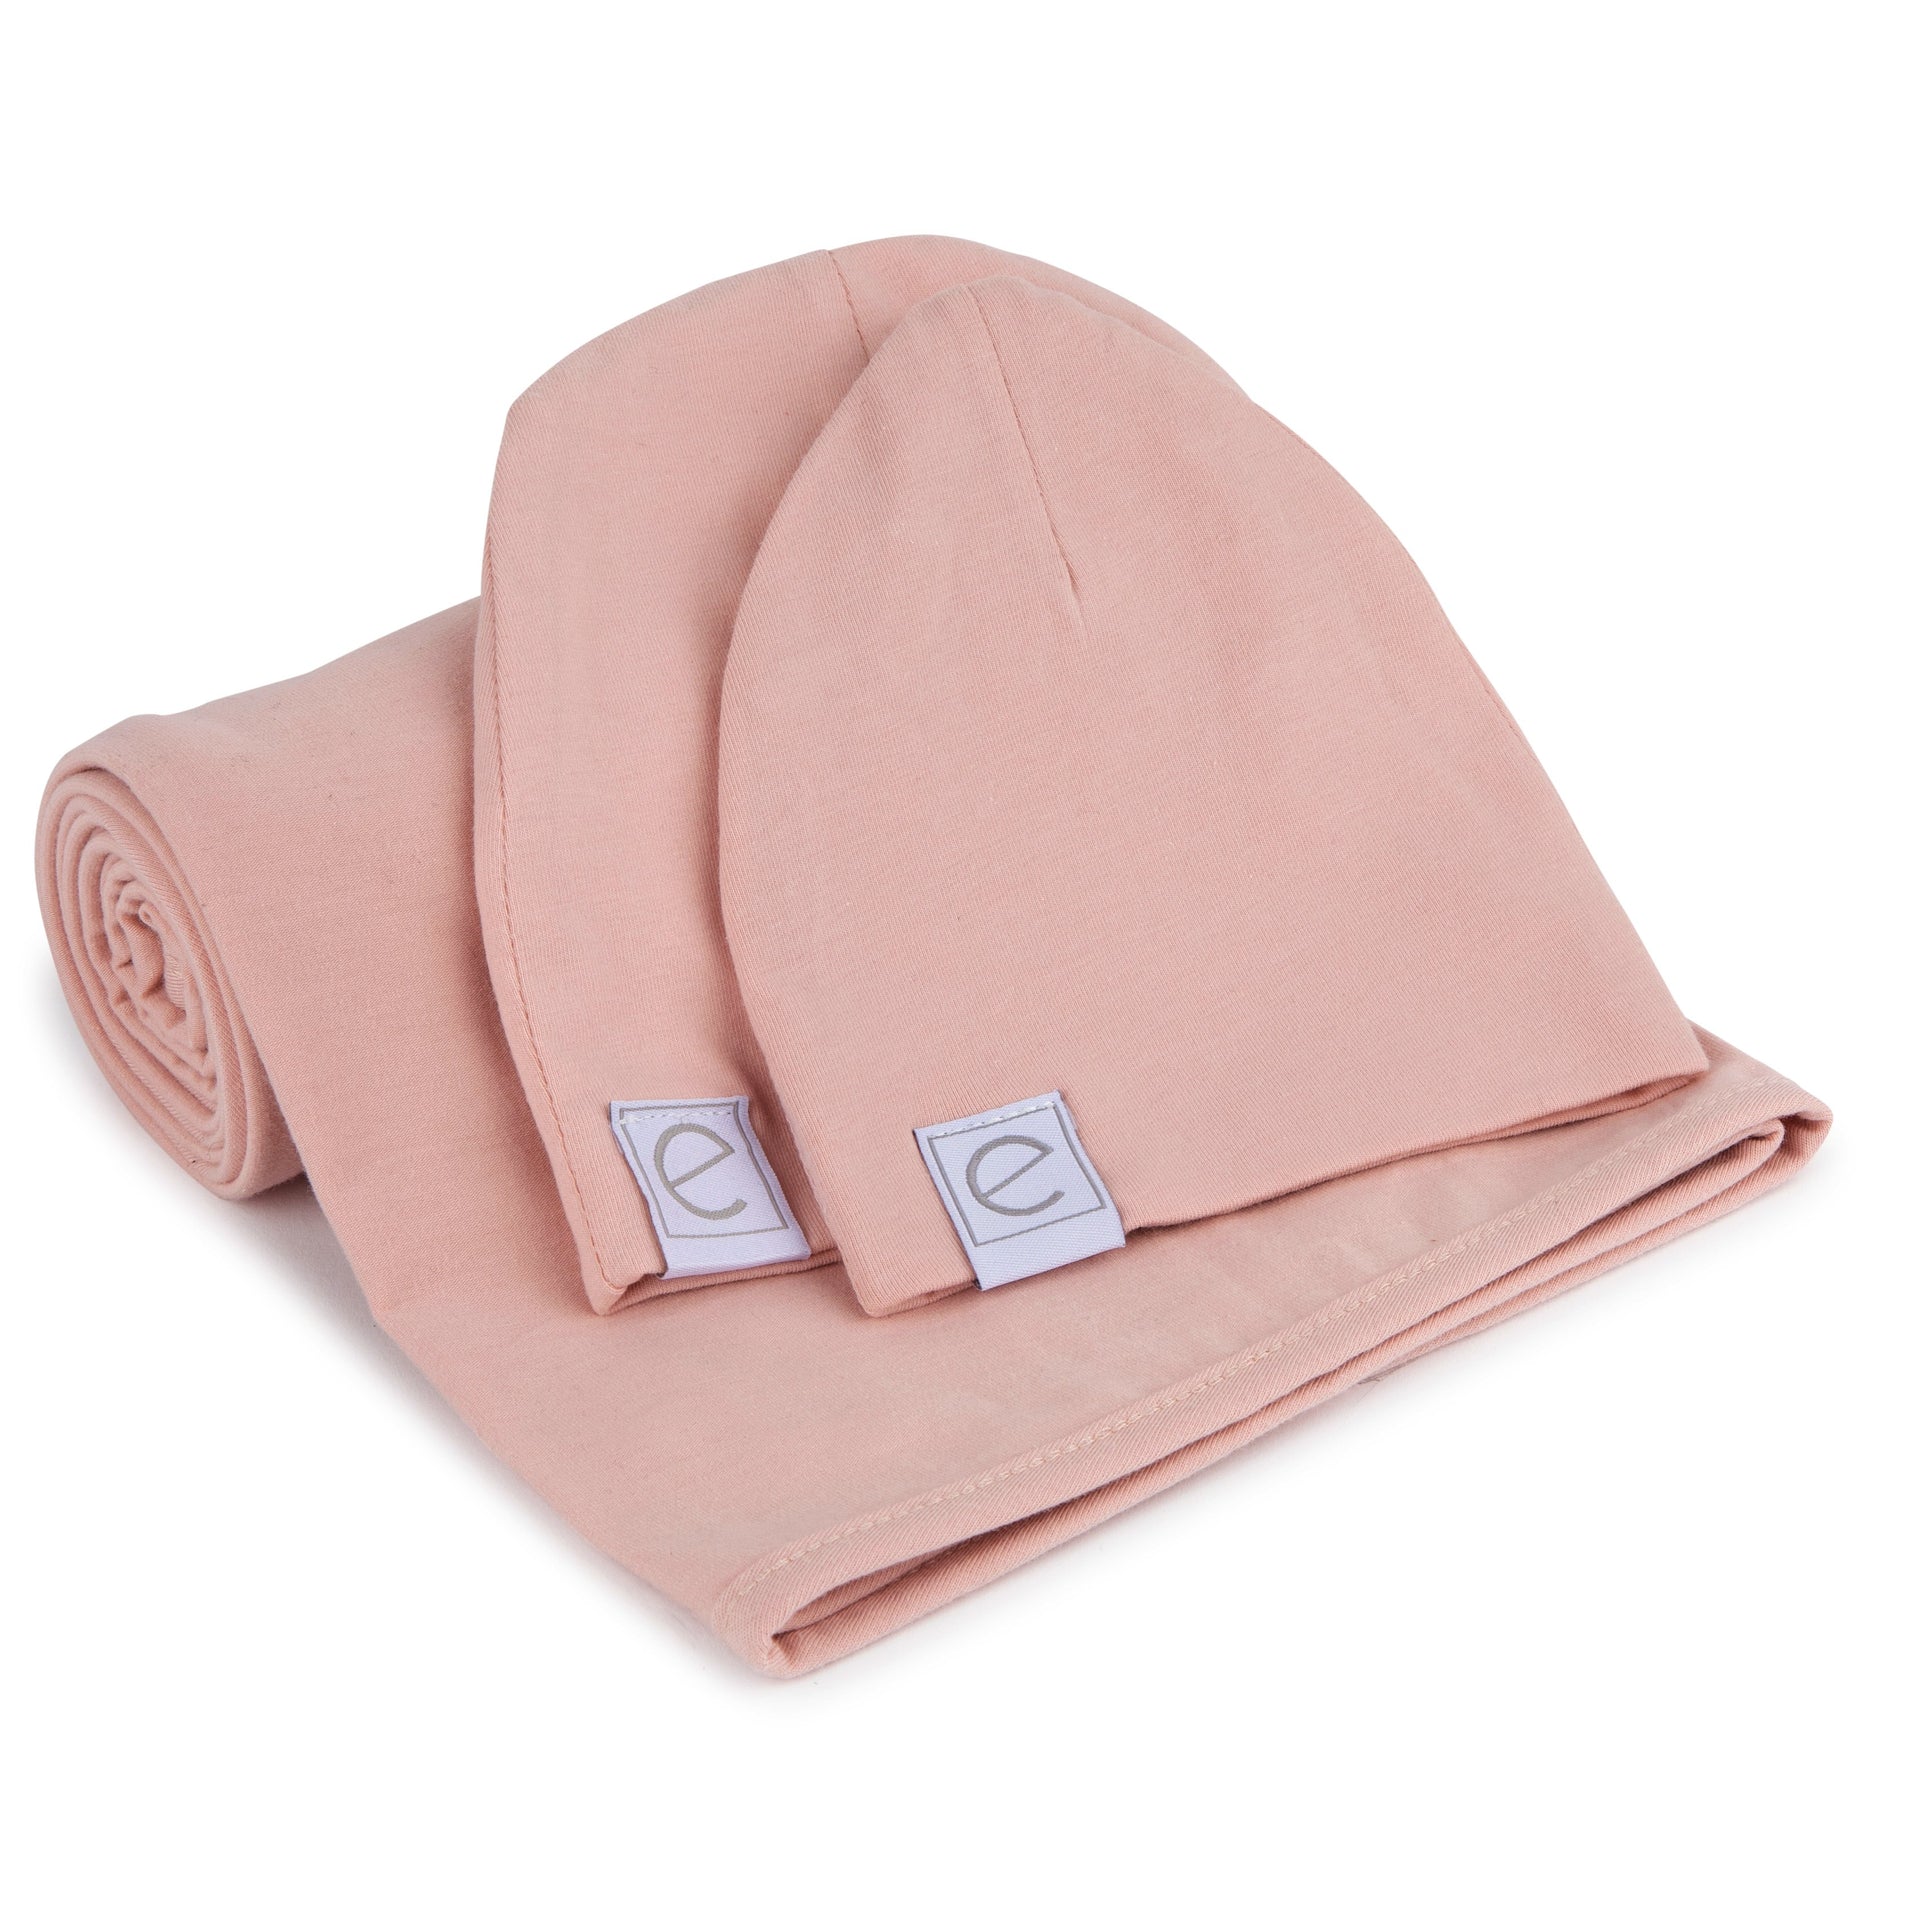 Ely's & Co  Modal Swaddle + Beanie Set-Pink